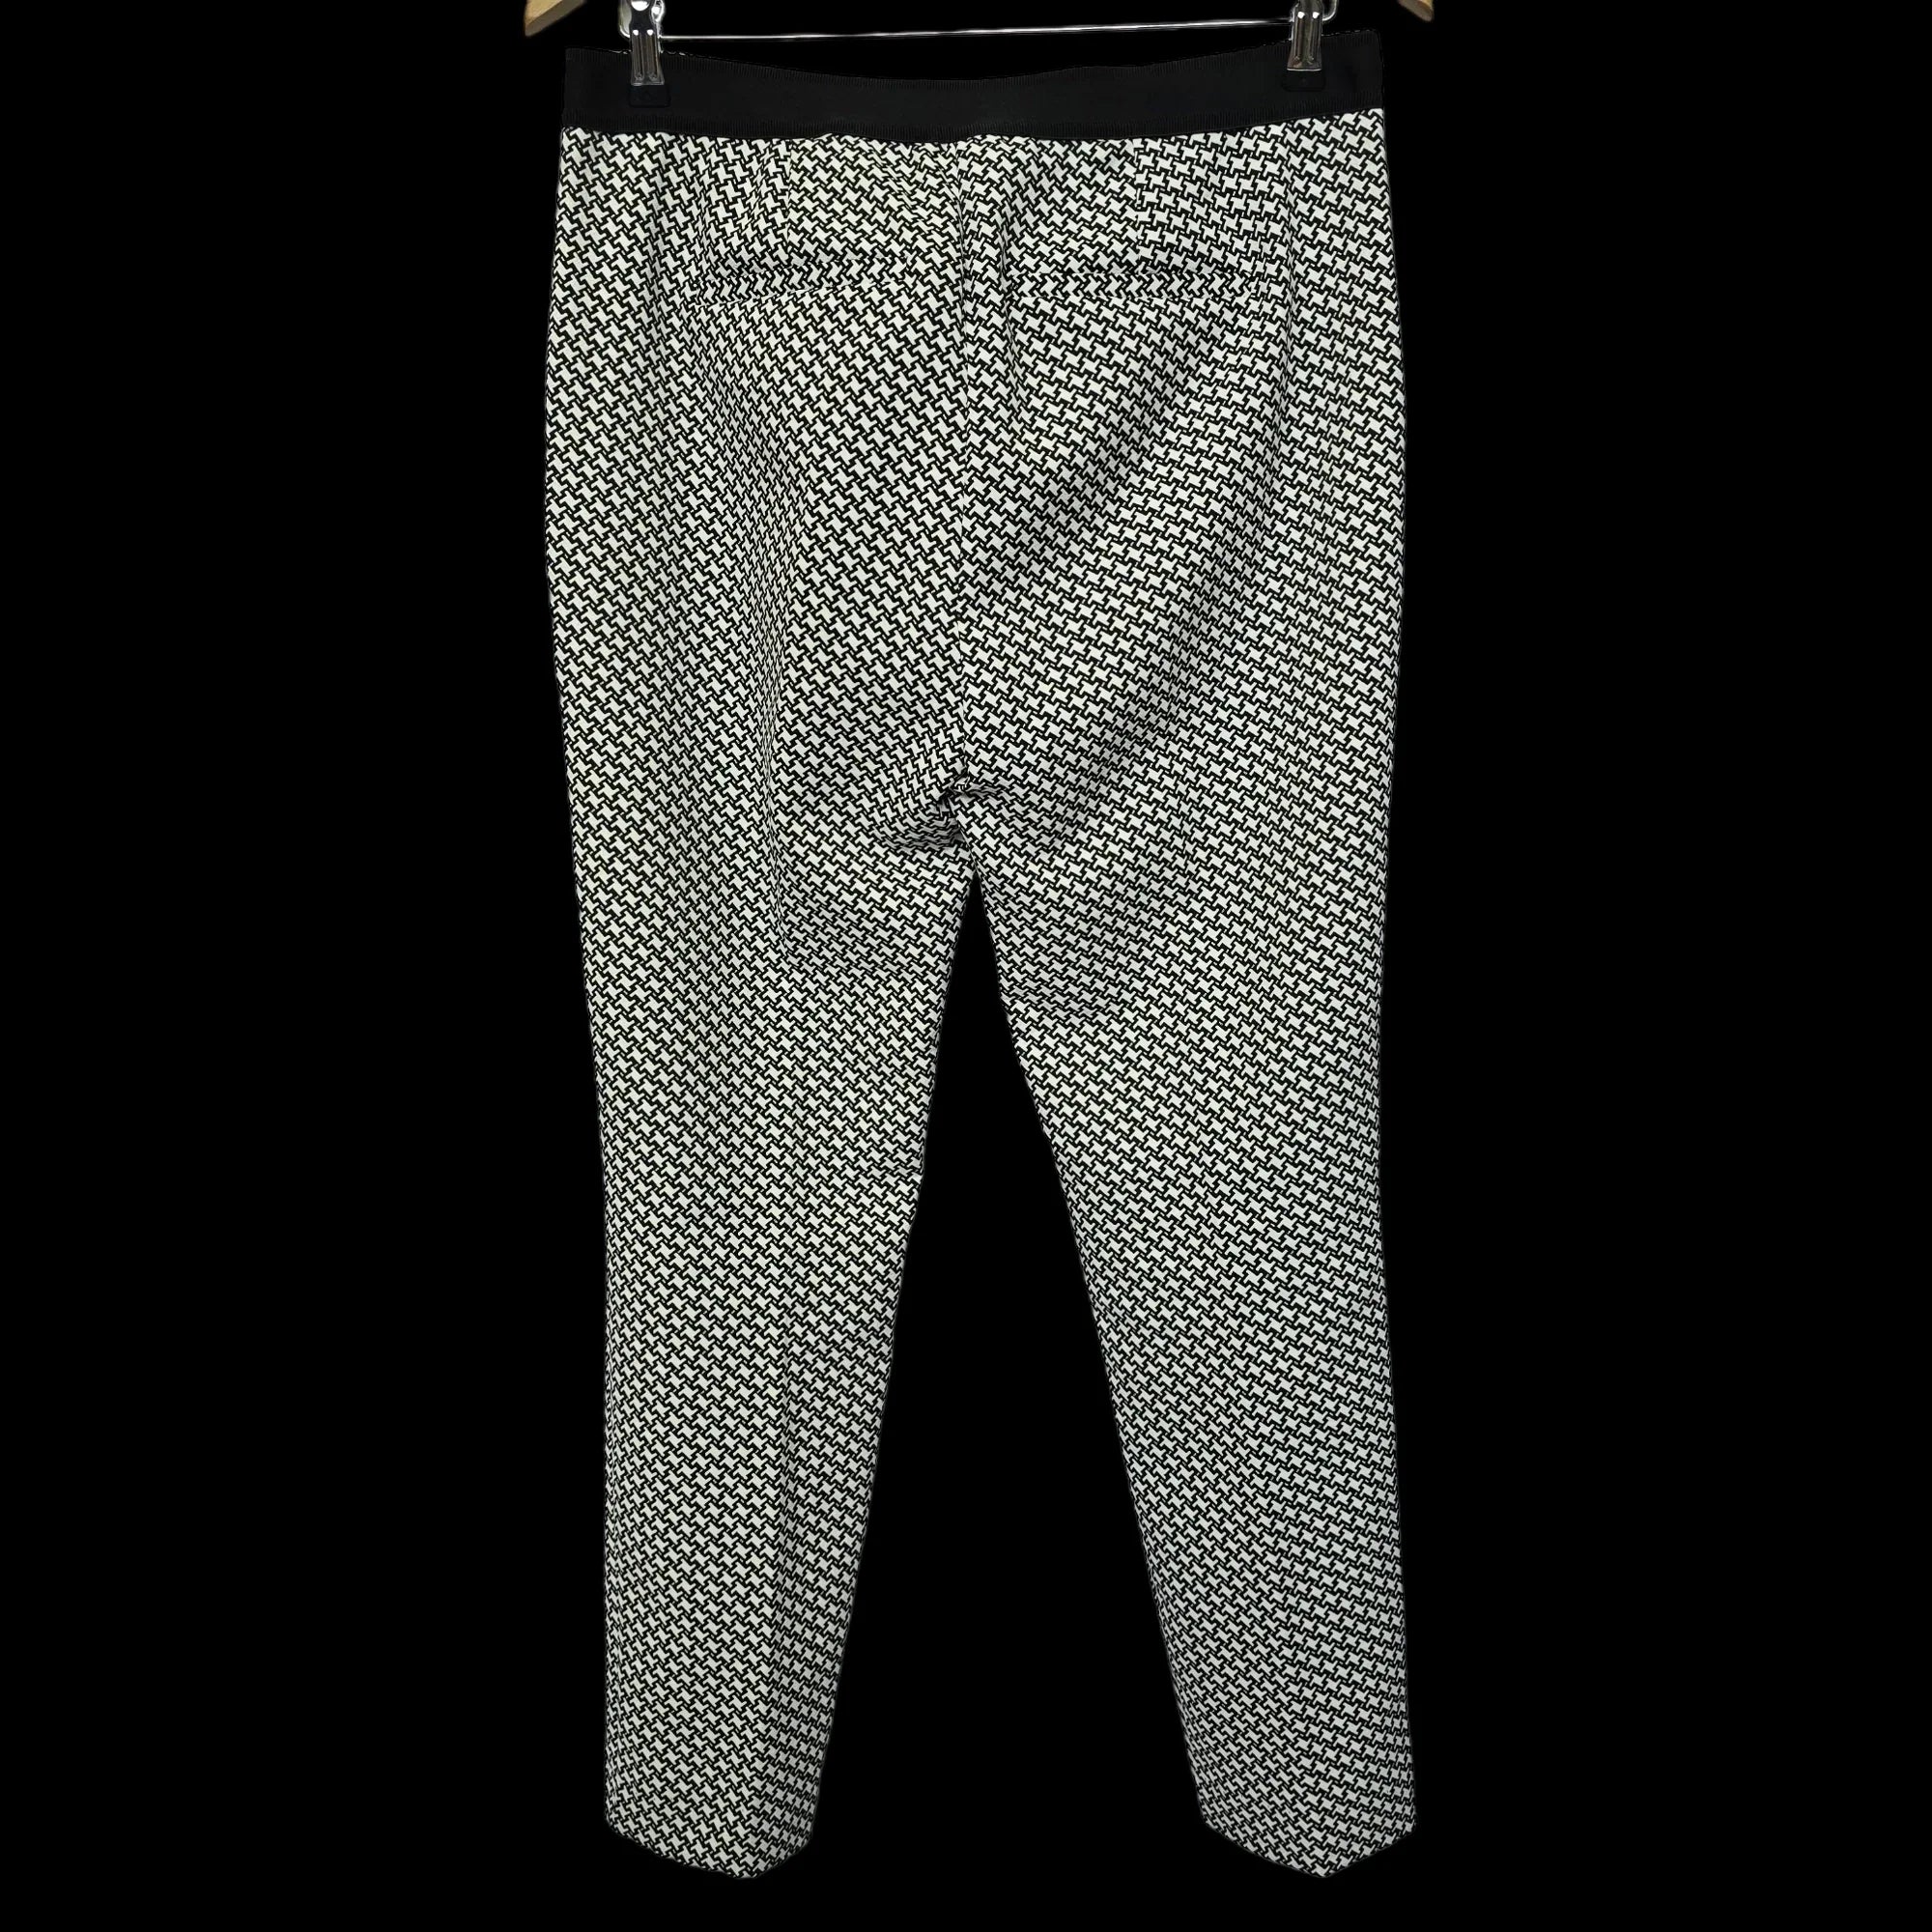 Womens Next Black And White Ankle Trousers UK 10R - 2 - 3598